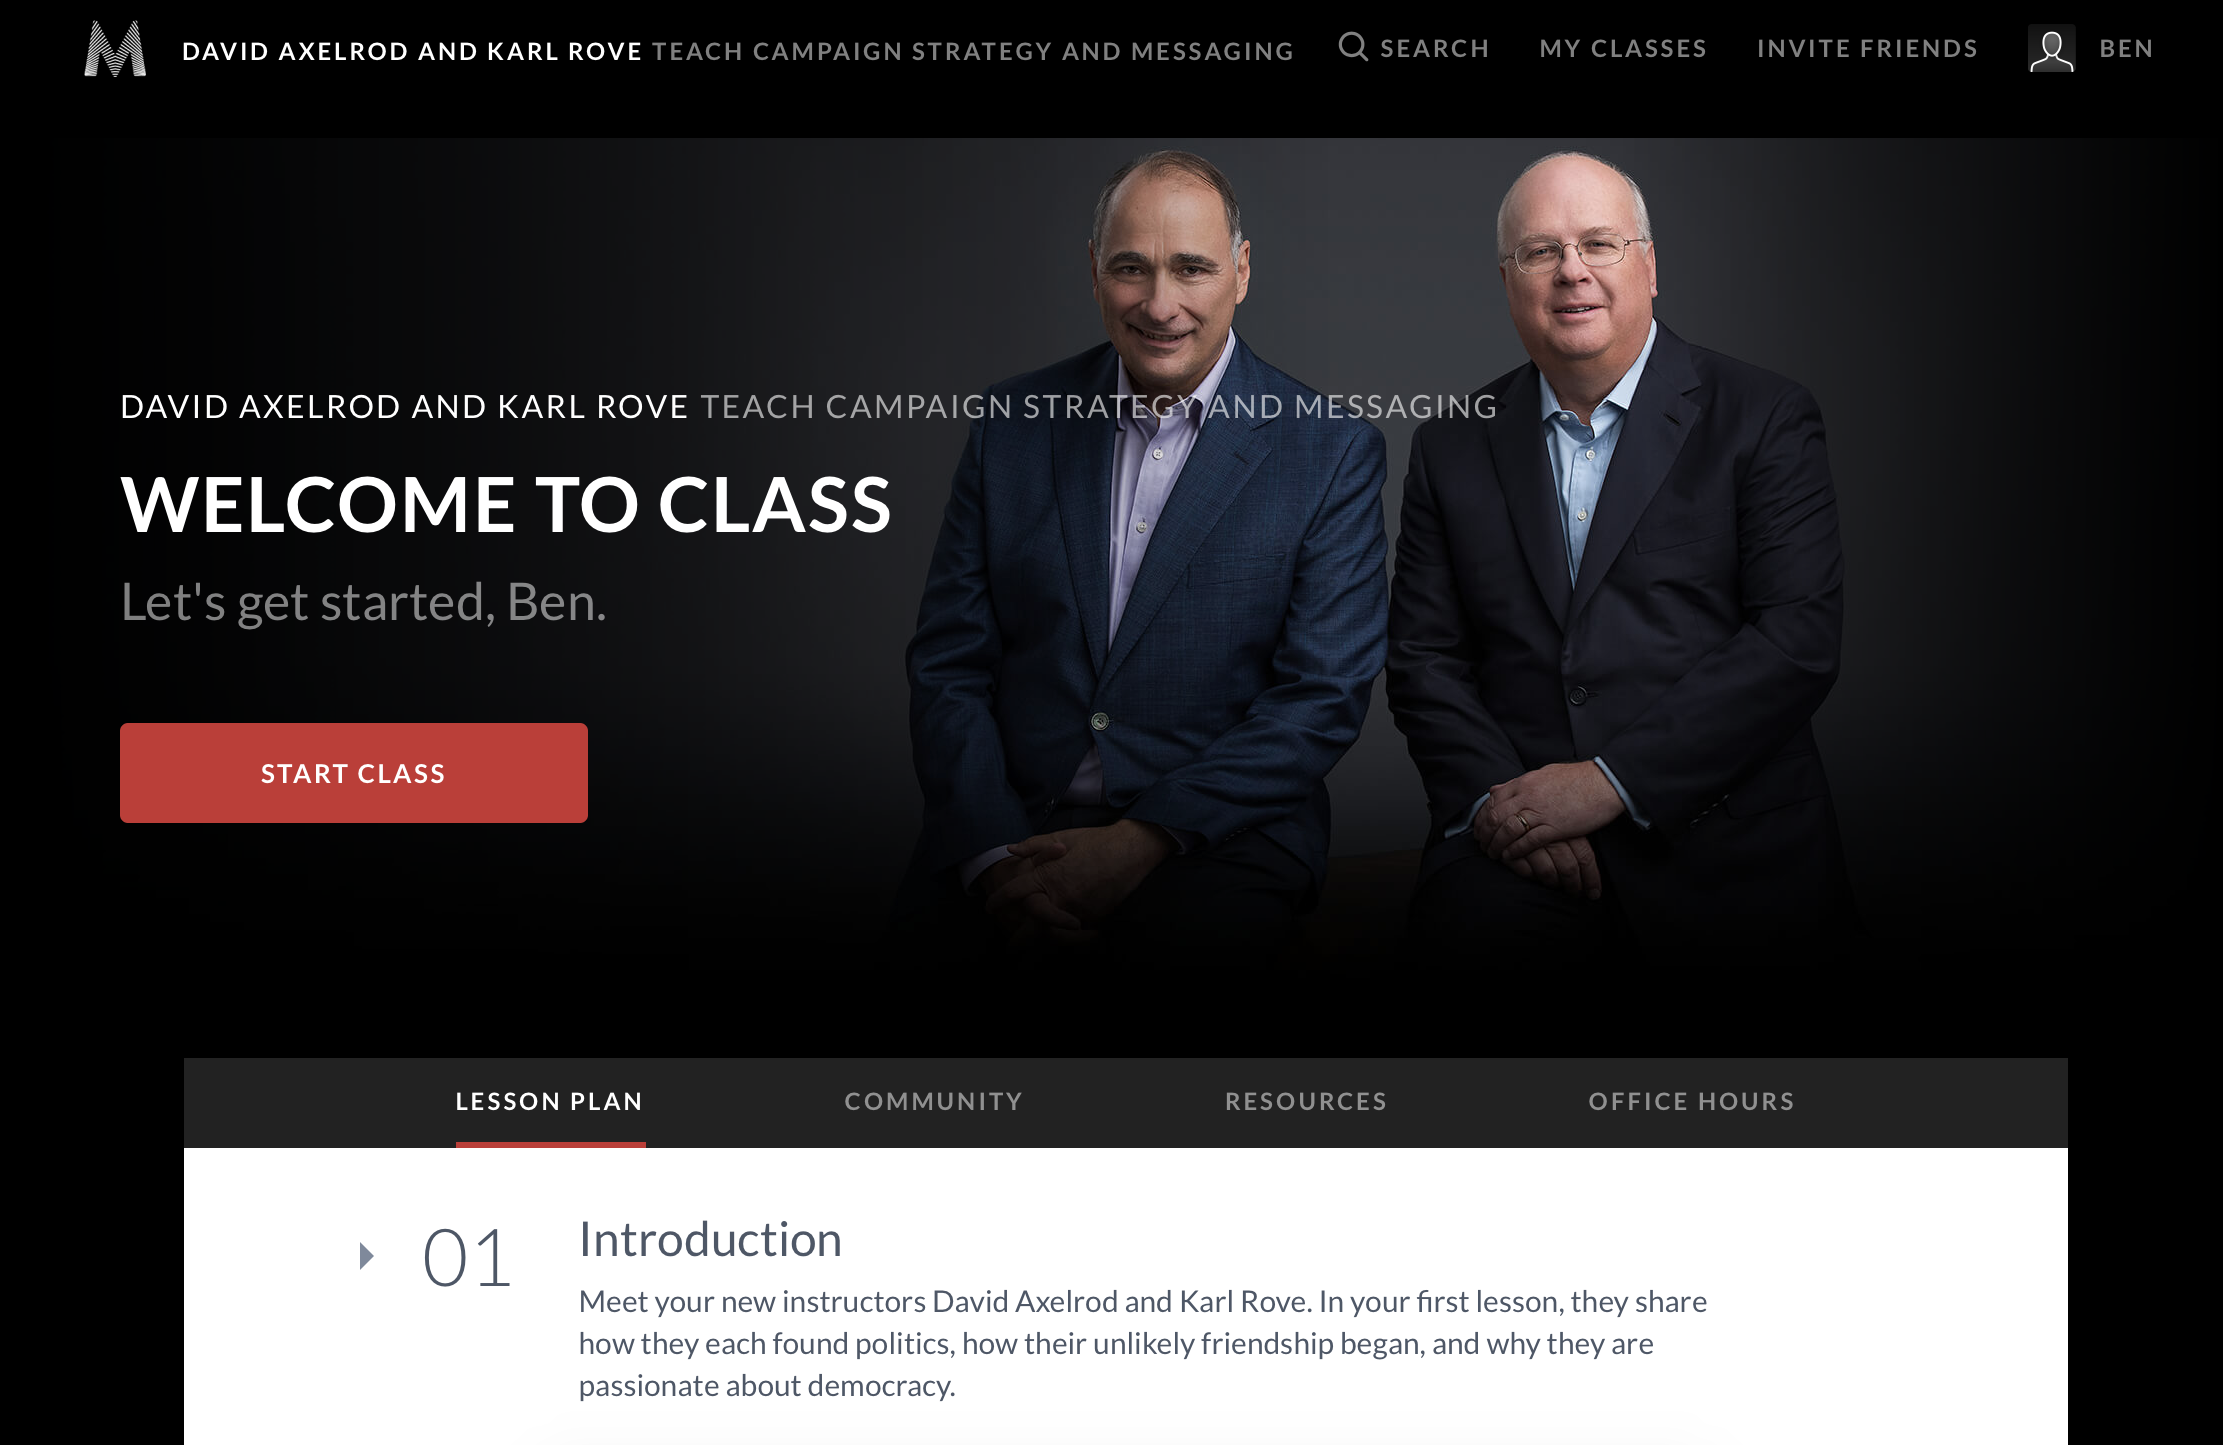 David Axelrod & Karl Rove Teach Campaign Strategy MasterClass Review